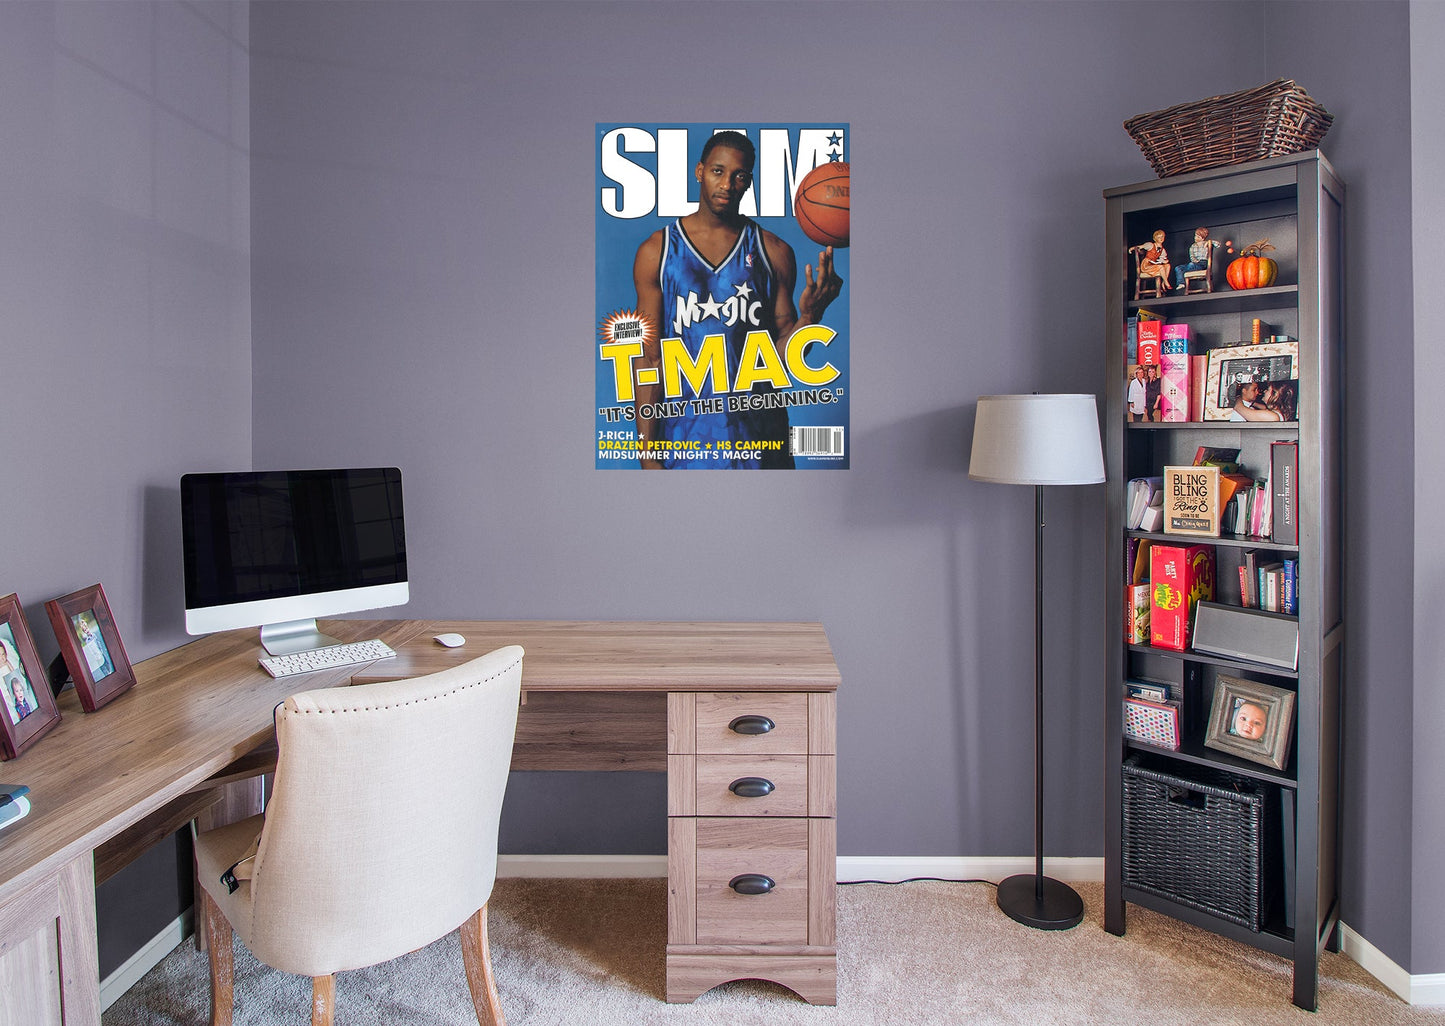 Orlando Magic: Tracy McGrady SLAM Magazine 64 Cover Mural - Officially Licensed NBA Removable Adhesive Decal